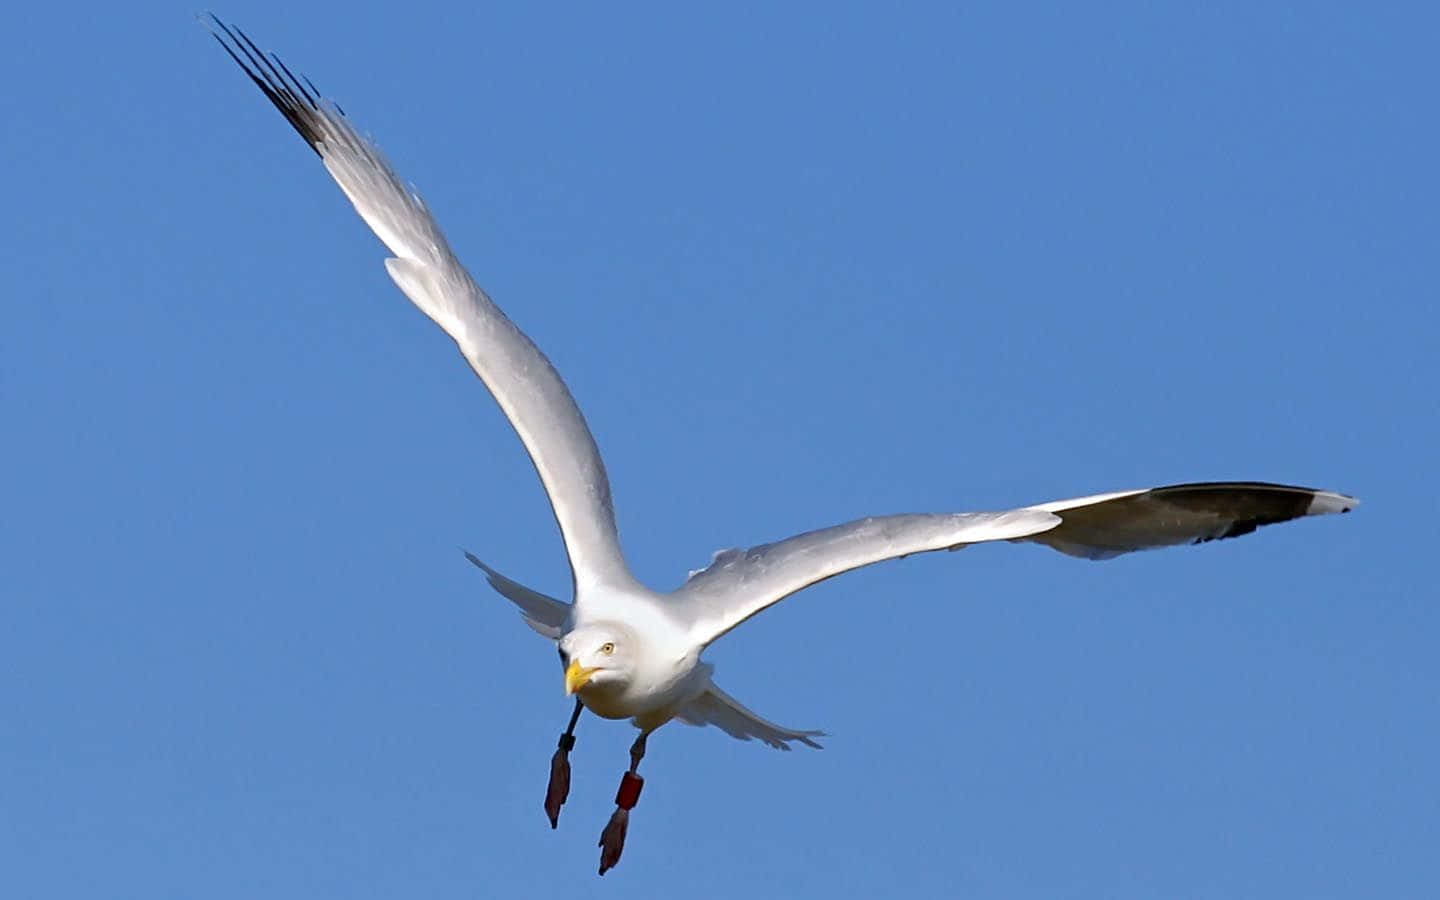 Majestic Seagull Soaring Over The Ocean Background